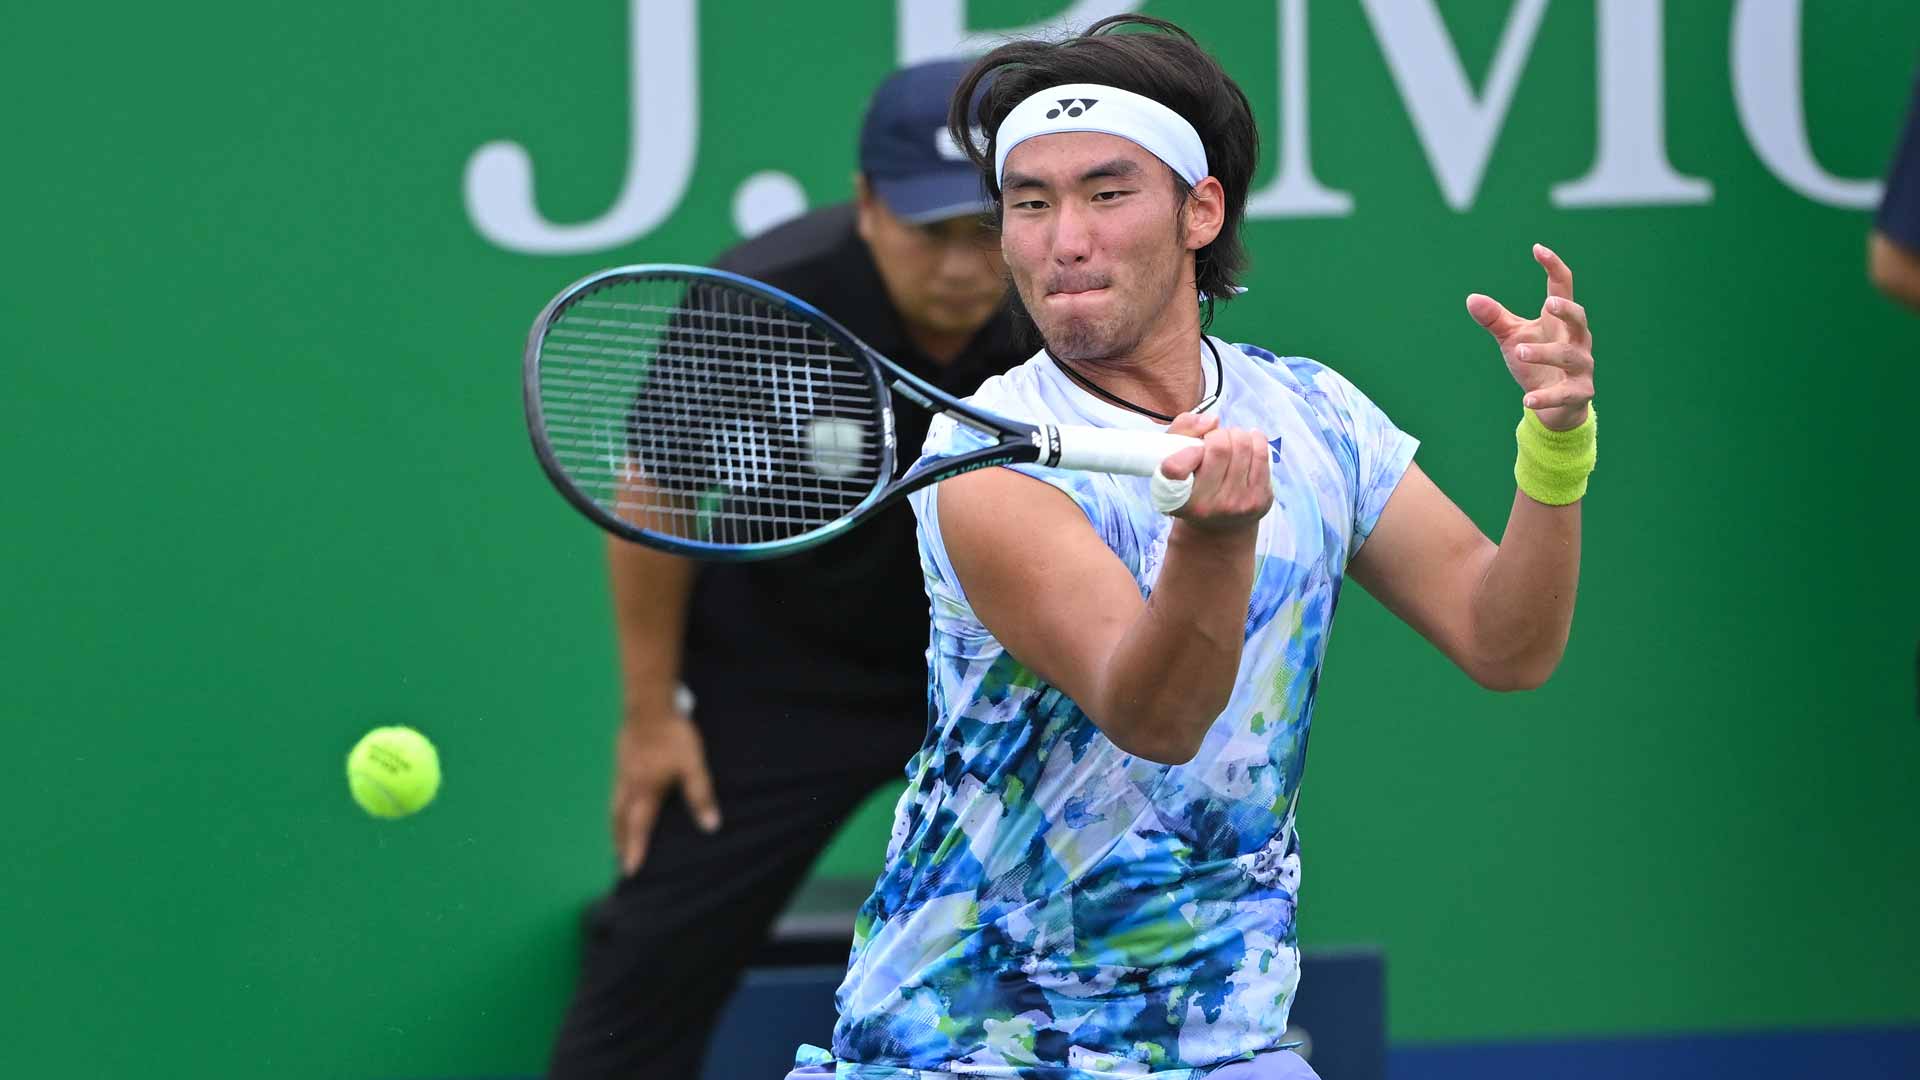 Buyunchaokete earns his maiden ATP Tour win at the Rolex Shanghai Masters.